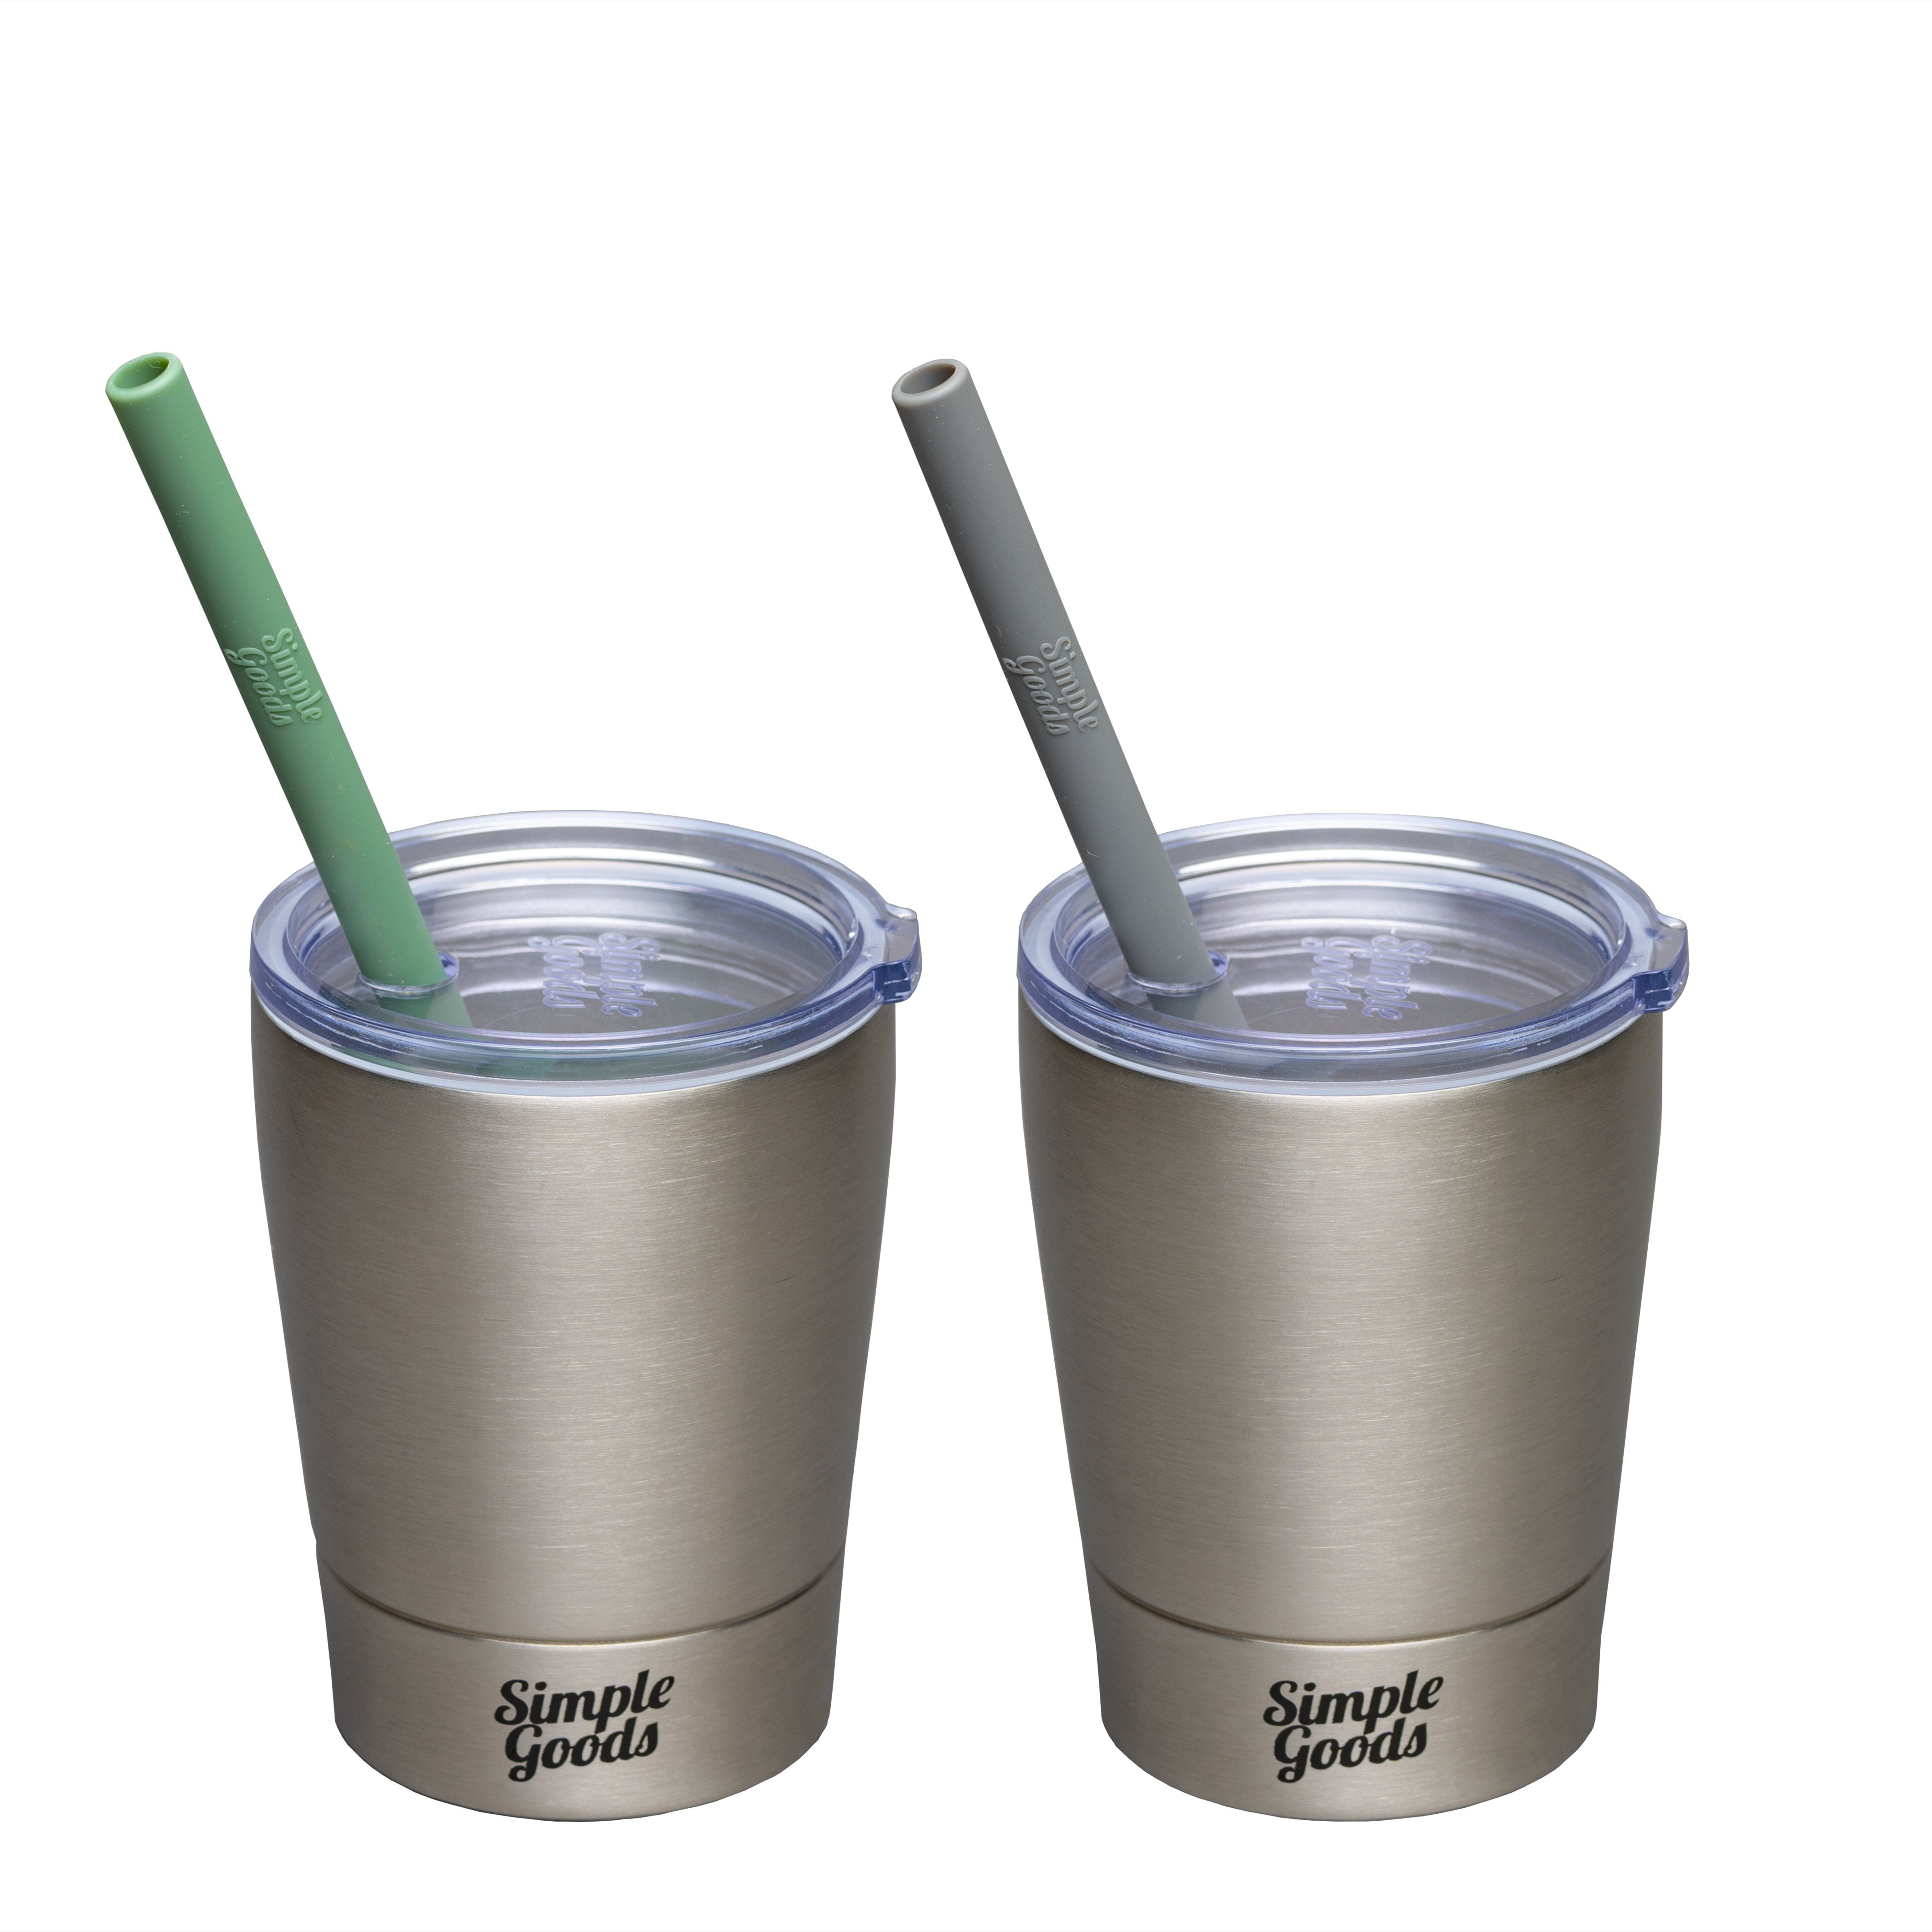 10oz Stainless Steel Kids' Cup with Straw, Sippy Cup